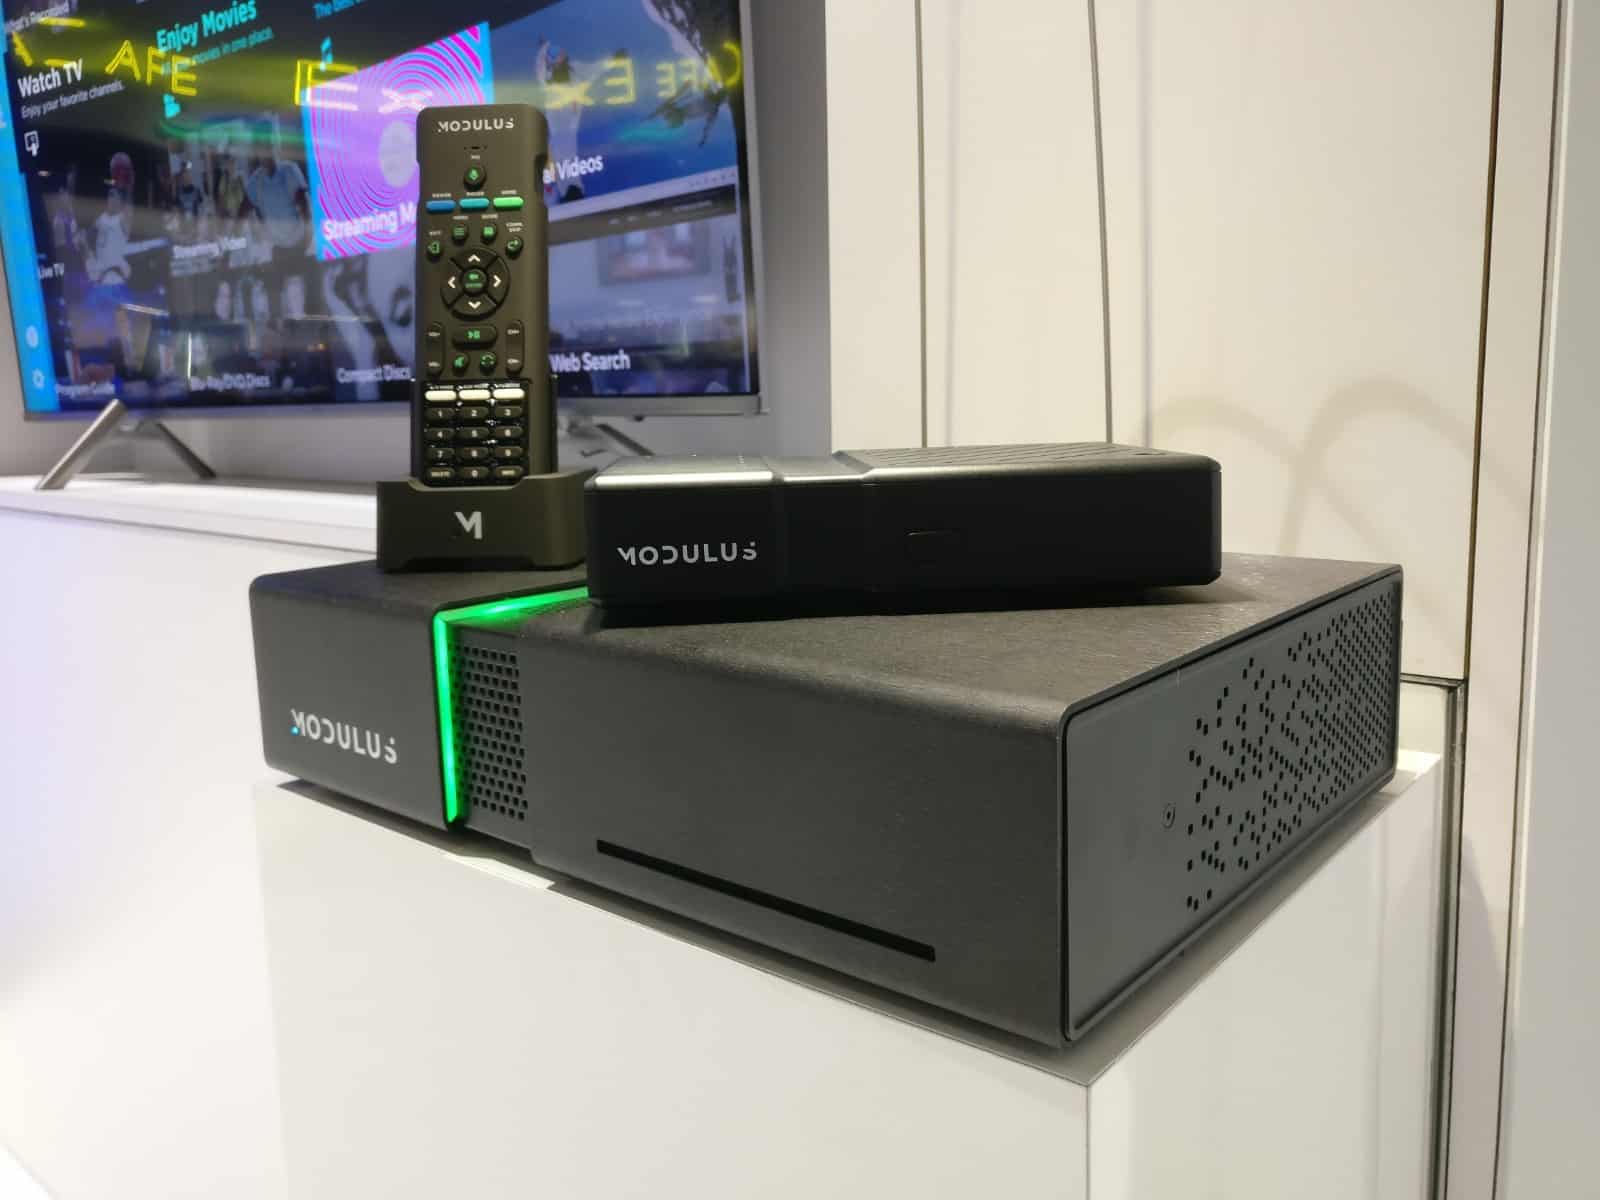 Modulus Media Systems M1 device and remote at CEDIA